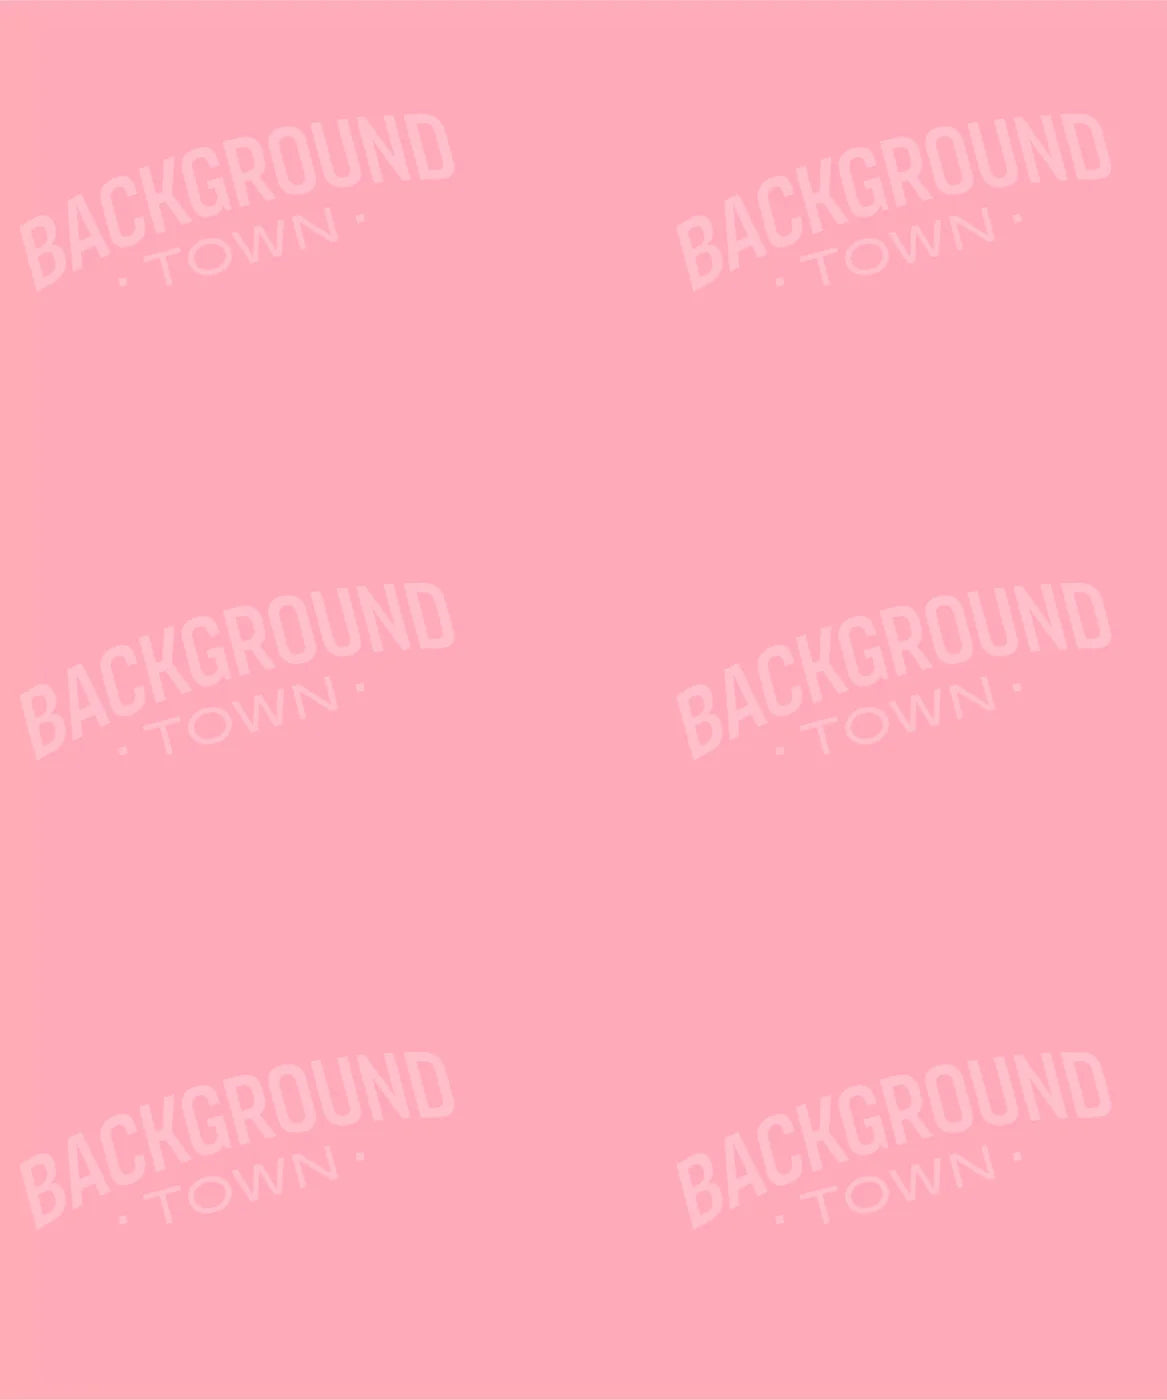 Candy Hearts Pink Solid Color Backdrop for Photography